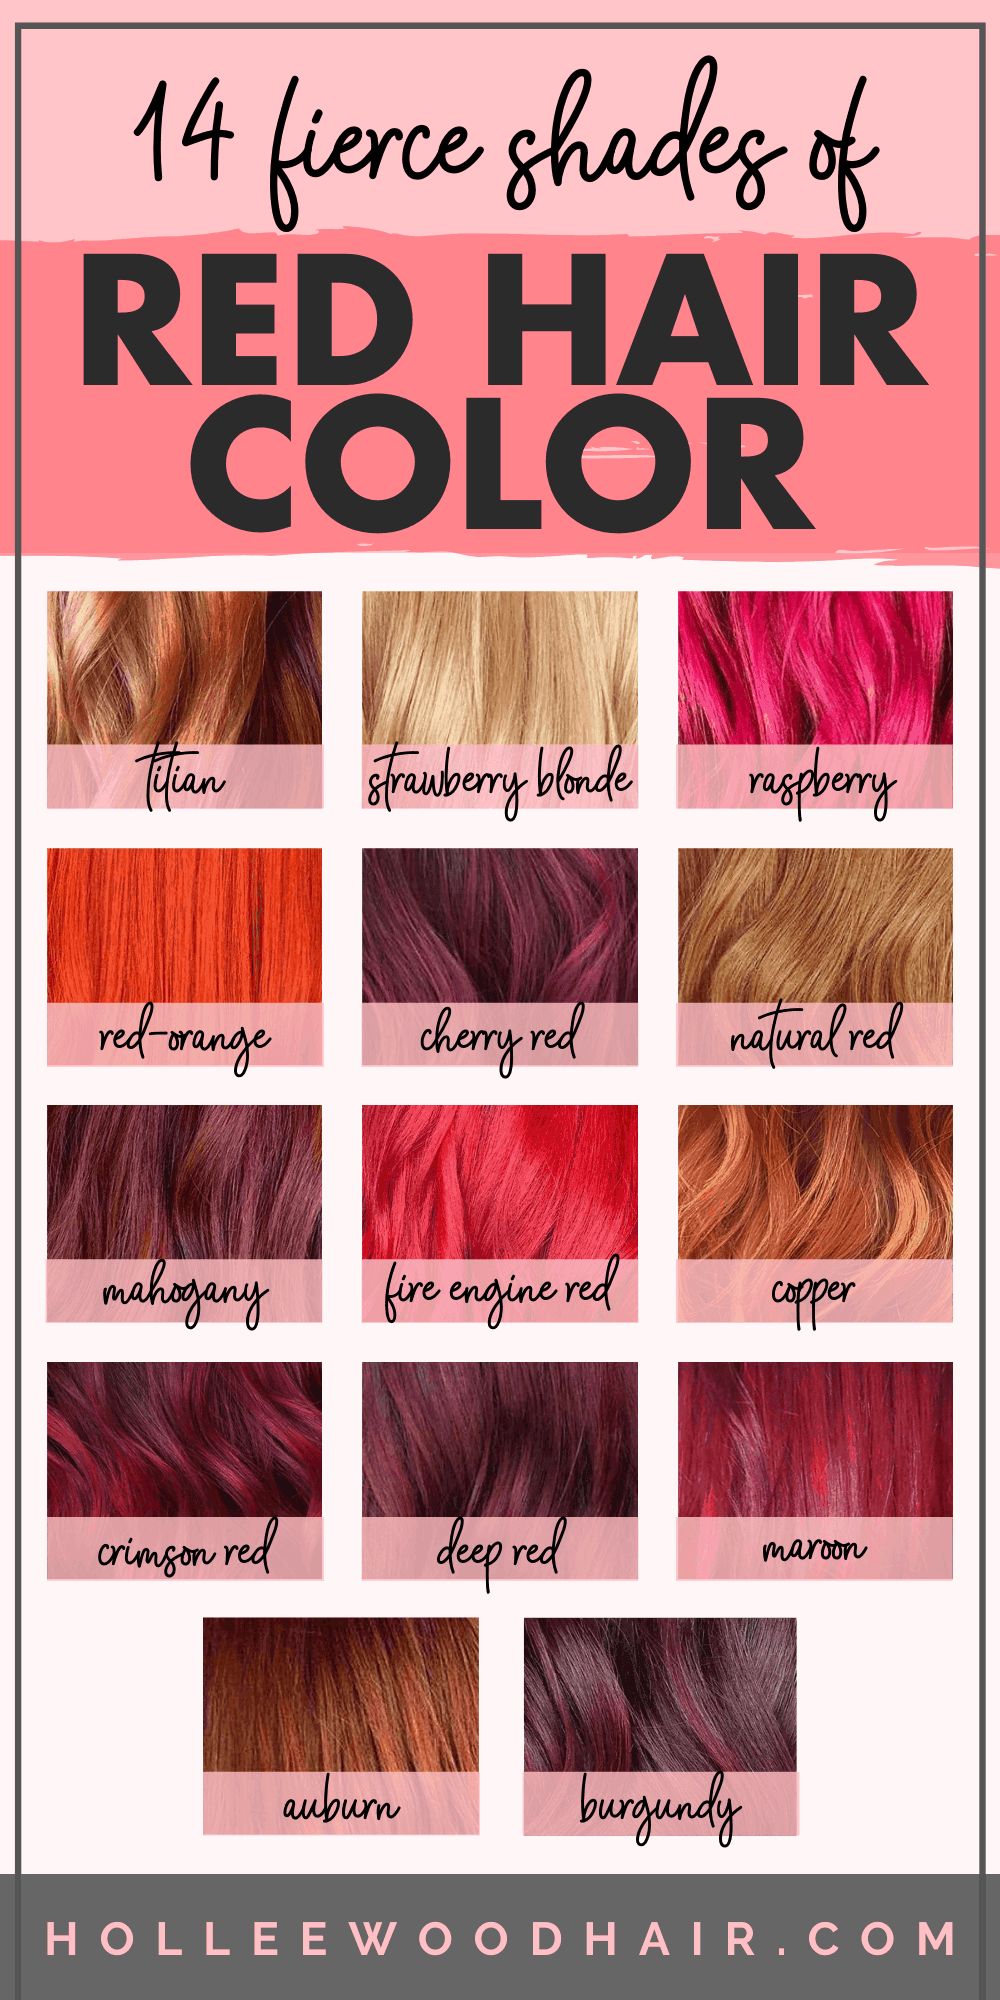 10 Red Hair Color Ideas To Try This Summer